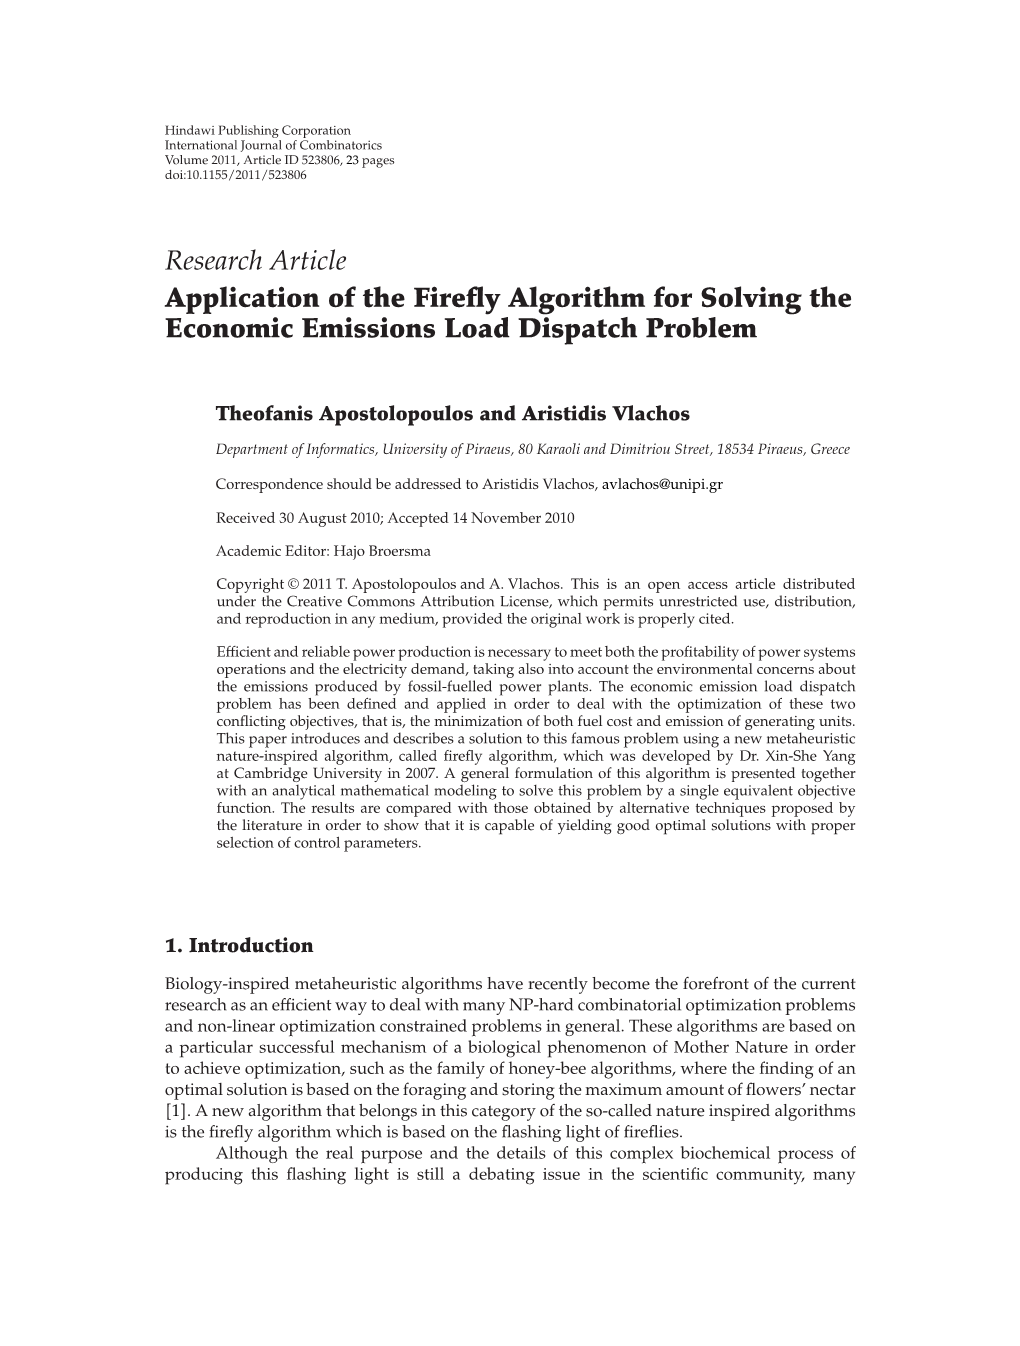 Research Article Application of the Firefly Algorithm for Solving The